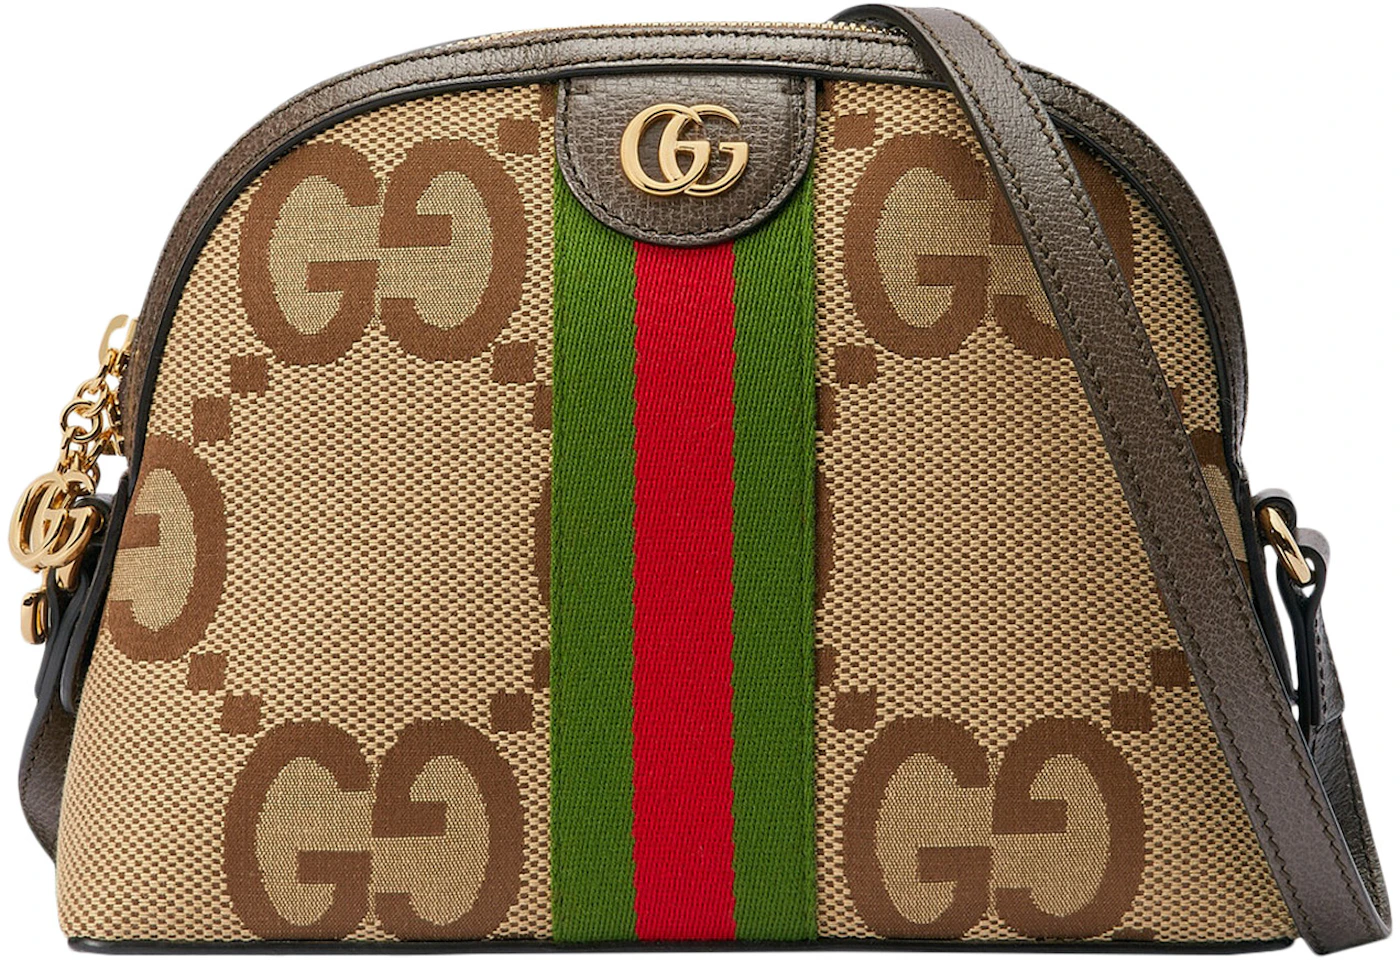 Ophidia GG small top handle bag in beige and ebony GG Supreme